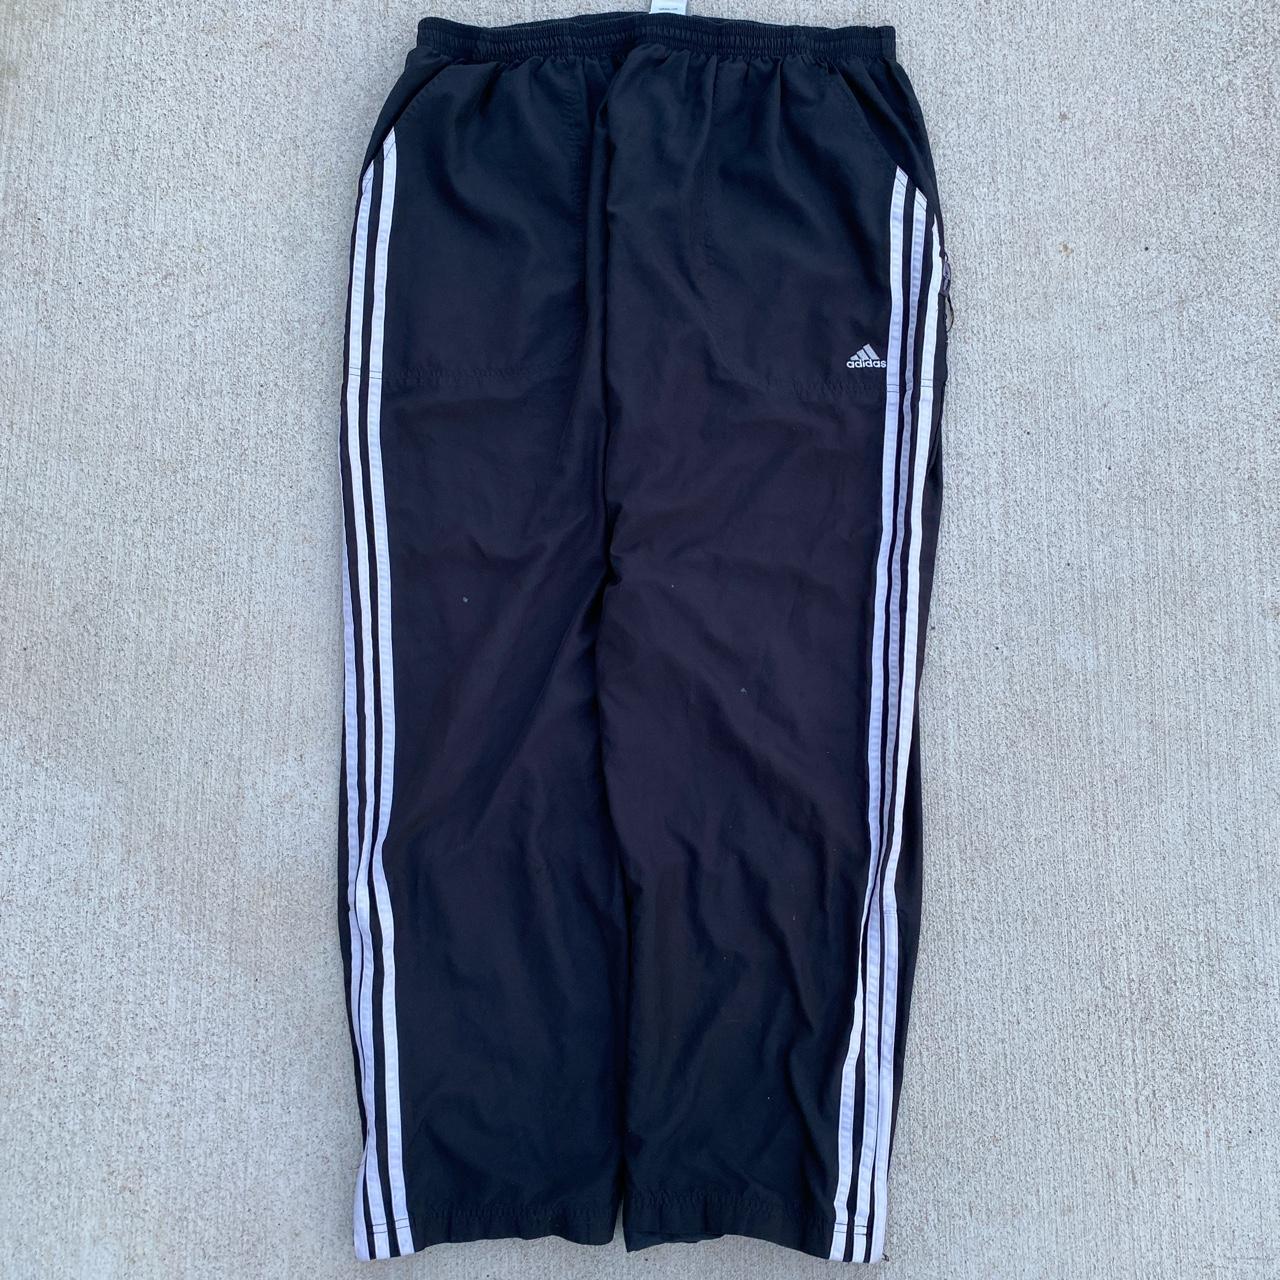 Adidas track pants 📐XL/32x30 Flaws shown in... - Depop